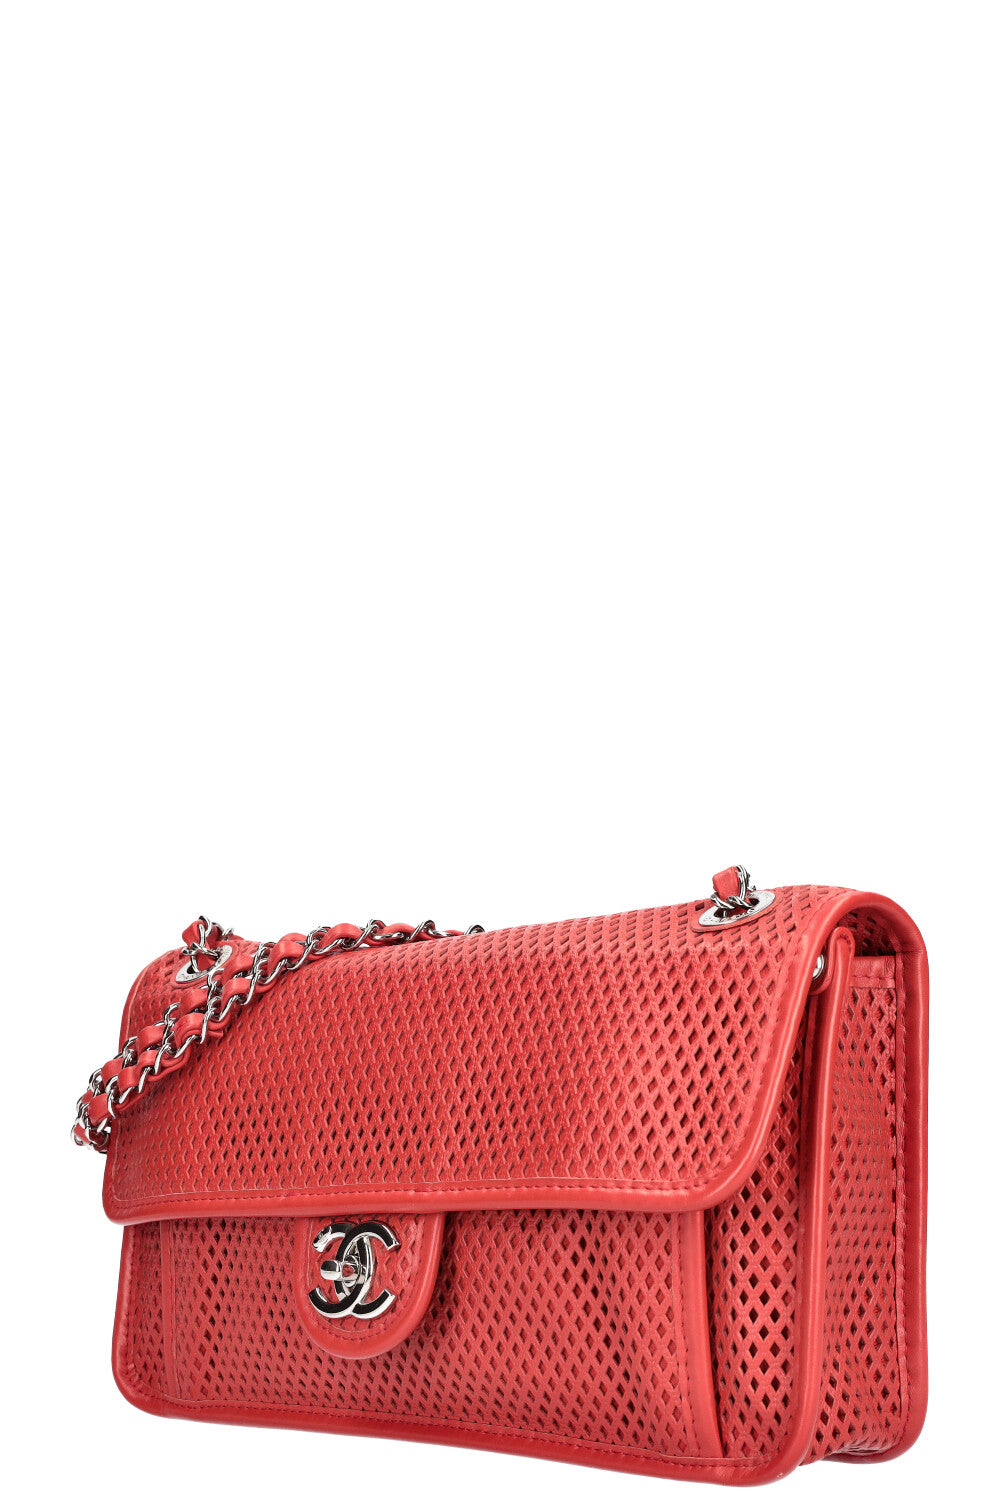 CHANEL Up in the Air Flap Bag Perforated Leather Red – REAWAKE